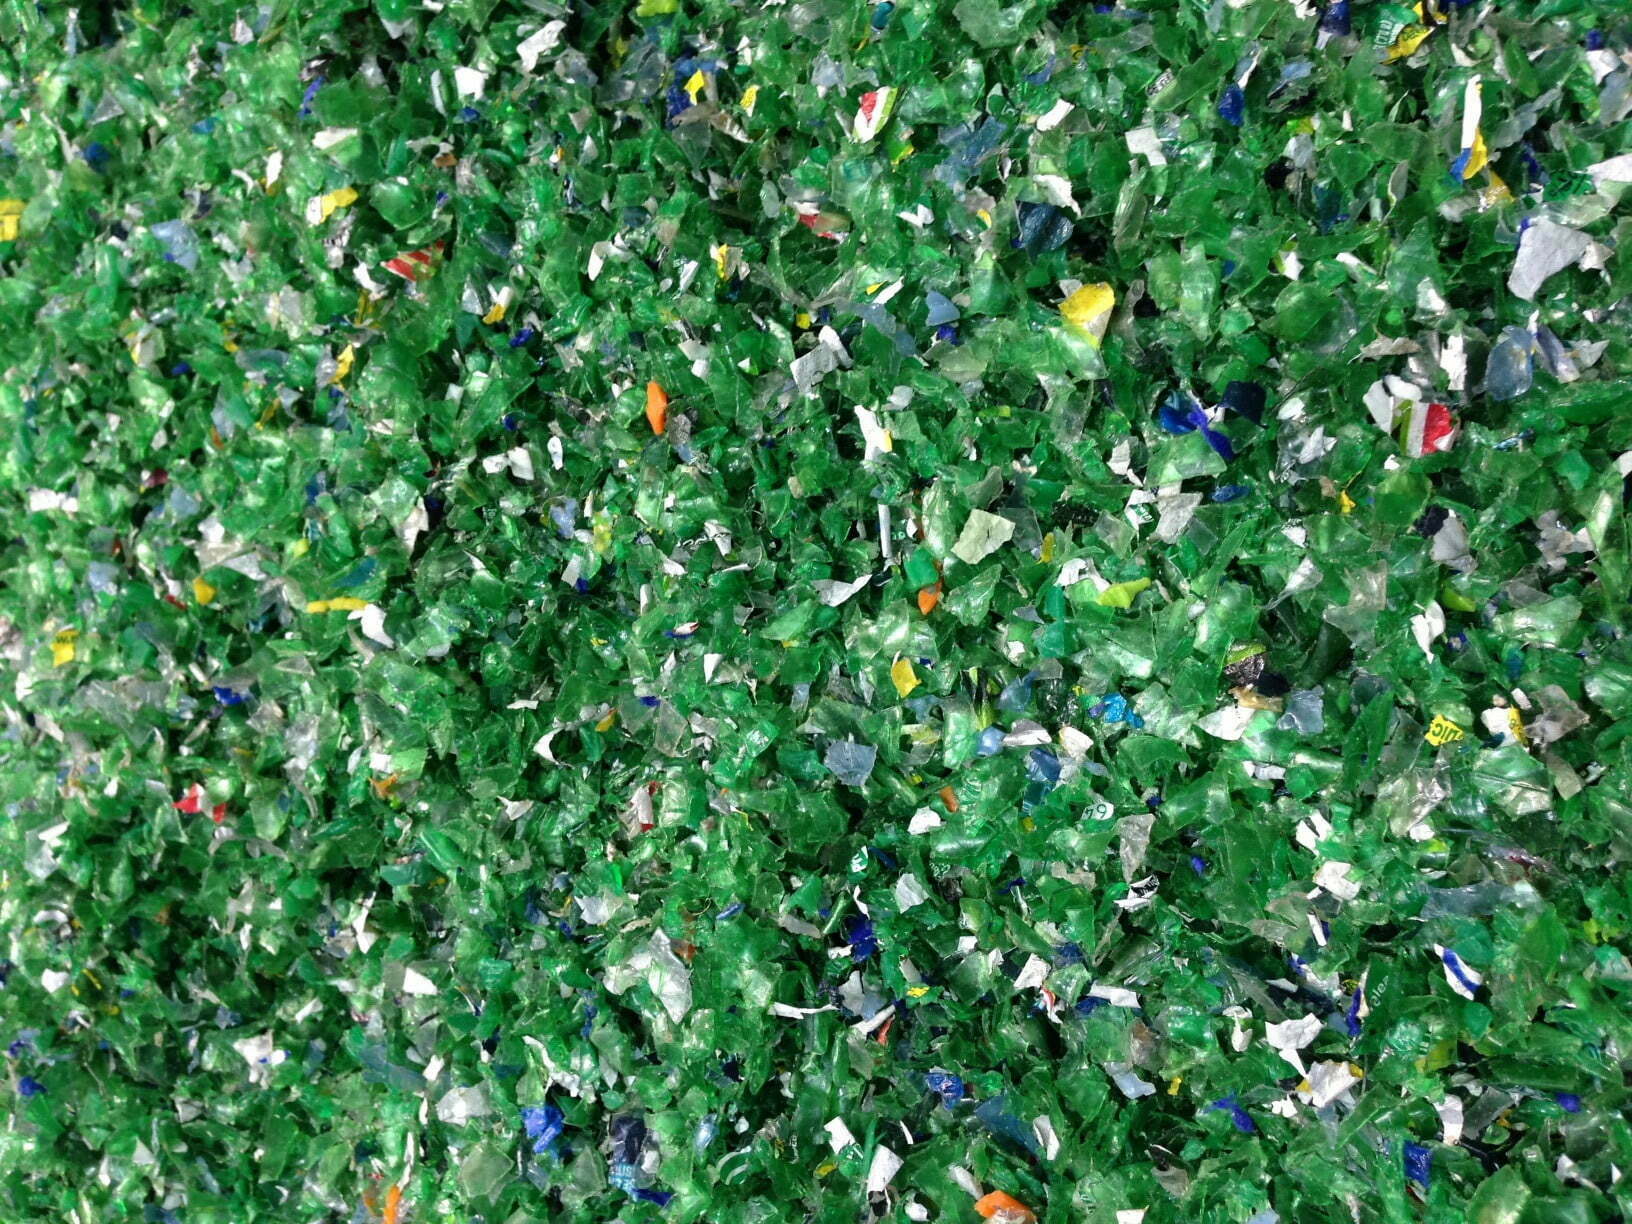 recycling center plastic pieces with labels from soda and other drink bottles earth day trash make t20 eORlem Plastic Packaging Might be Biodegradable After All